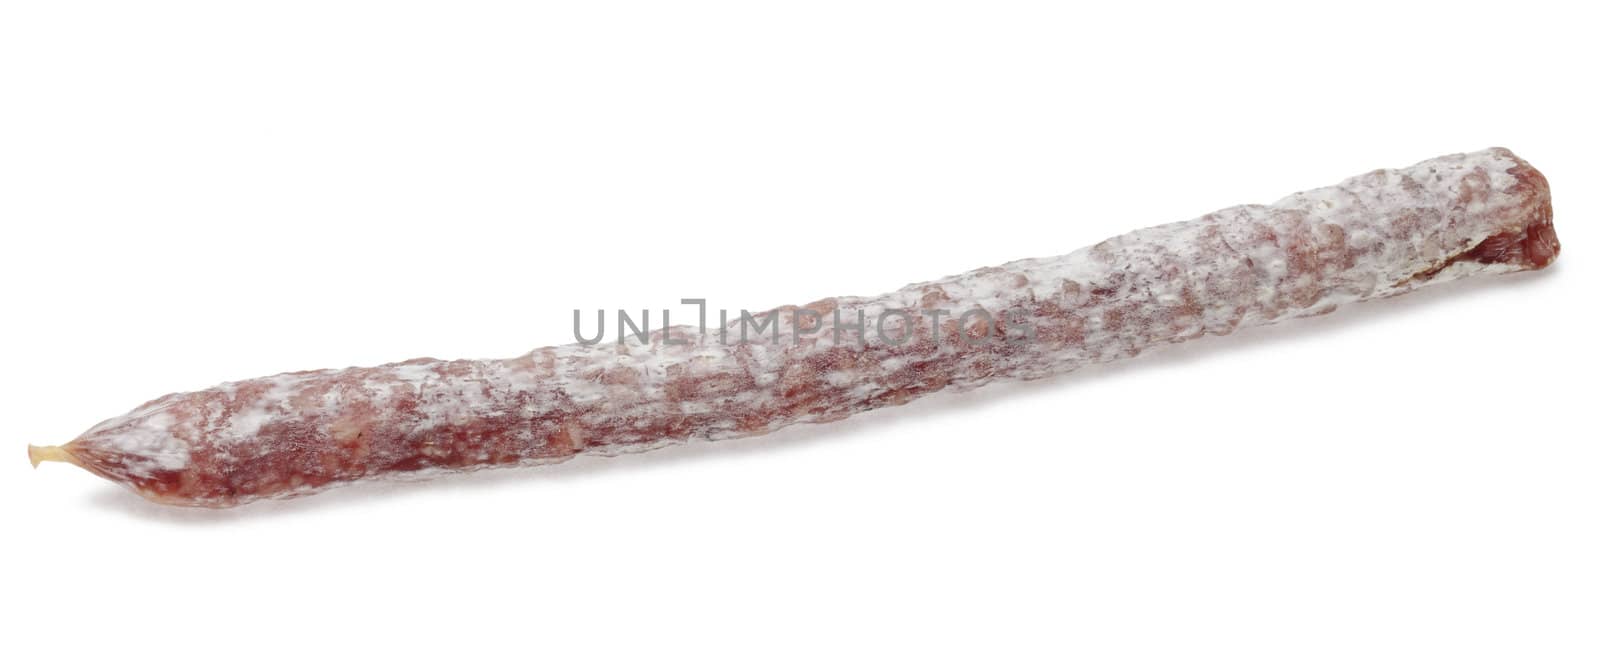 Image of a dry French sausage against a white background.